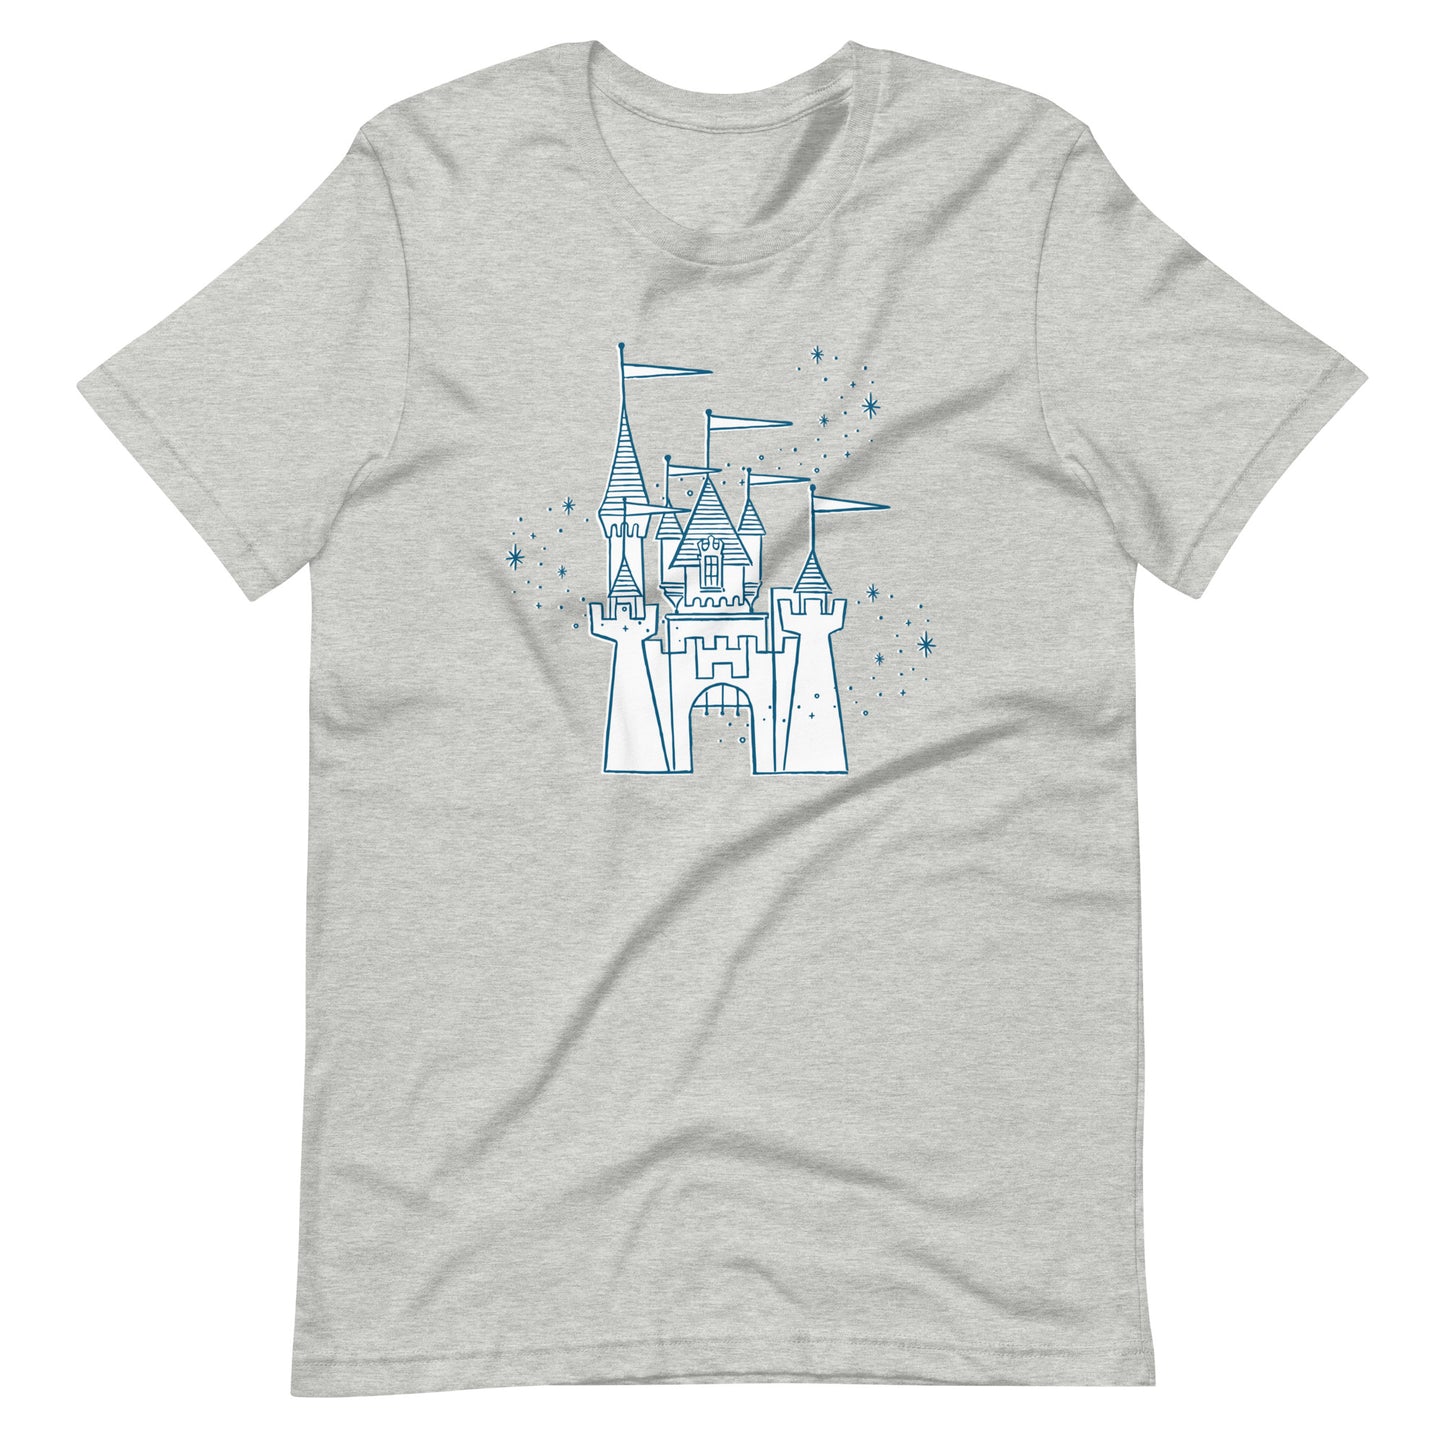 Gray shirt printed with vintage style sketch of the Disneyland Castle and pixie dust above the castle.